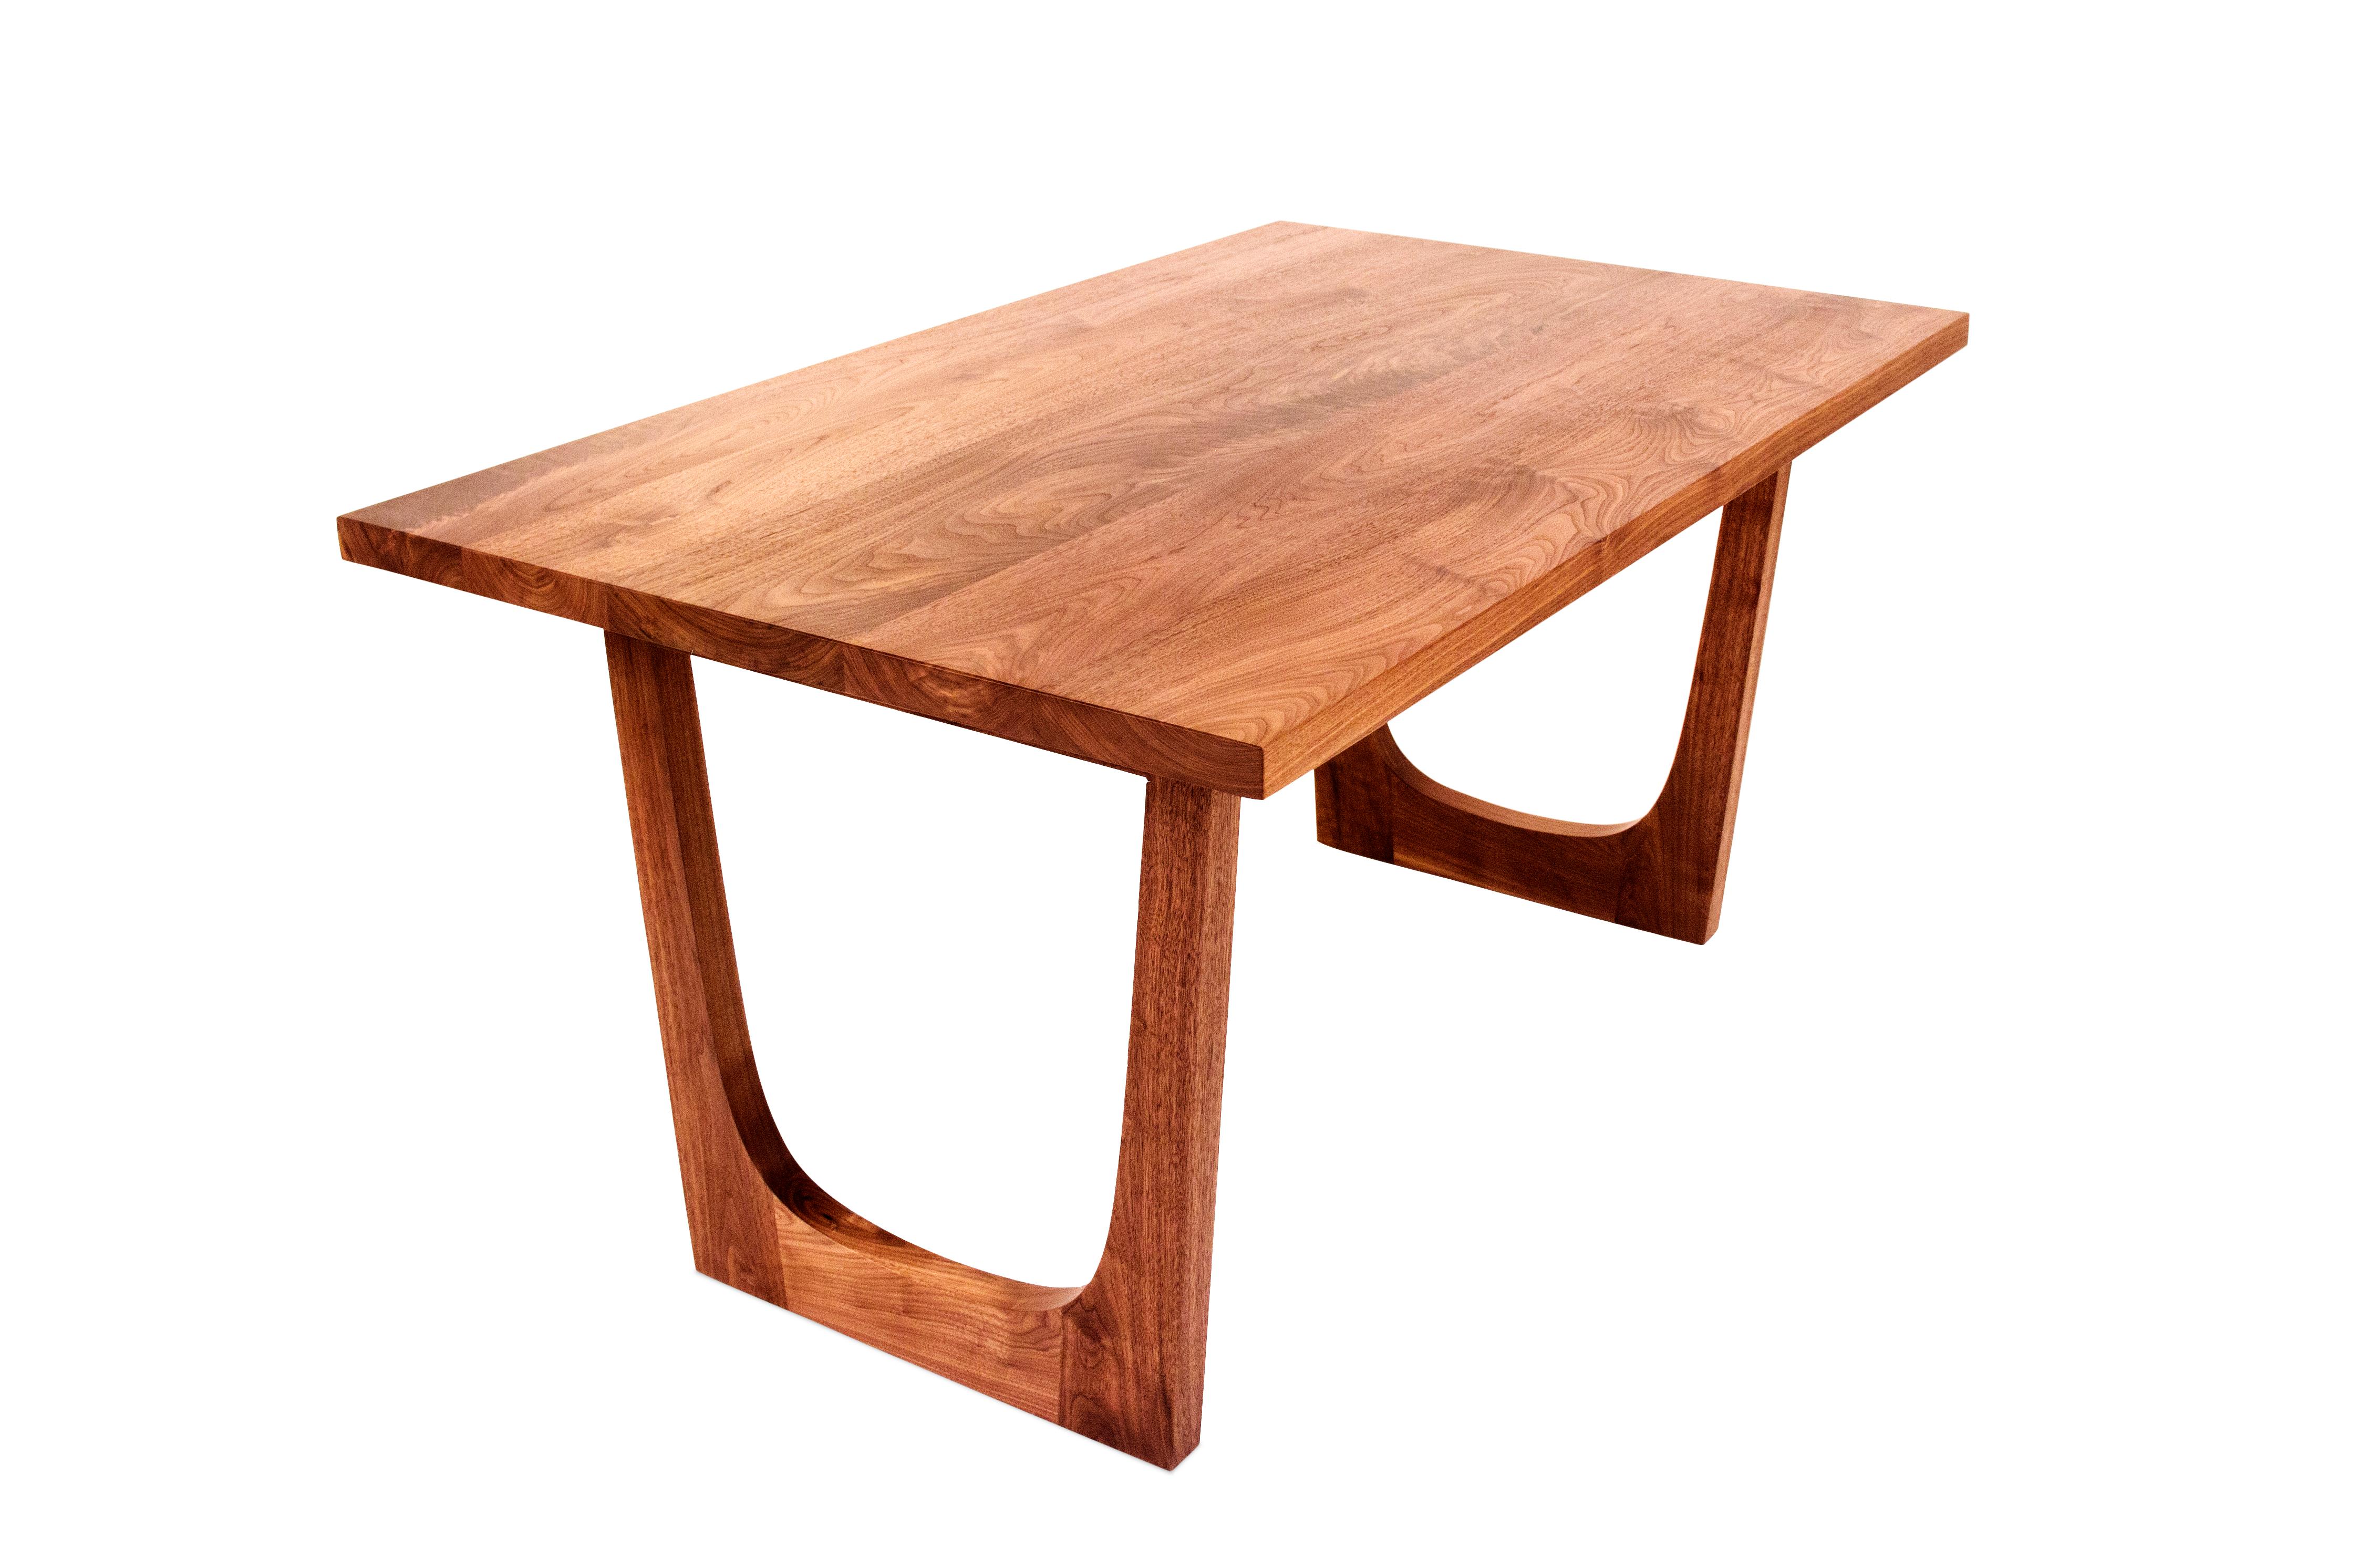 The Classic and elegant Lolita dining table features a solid black walnut tabletop and base. Other wood and stain options available. 

Standard size options, 10-12 week lead time (price varies by size):
L 72 in., W 42 in. or 44 in., H 30 in
L 84